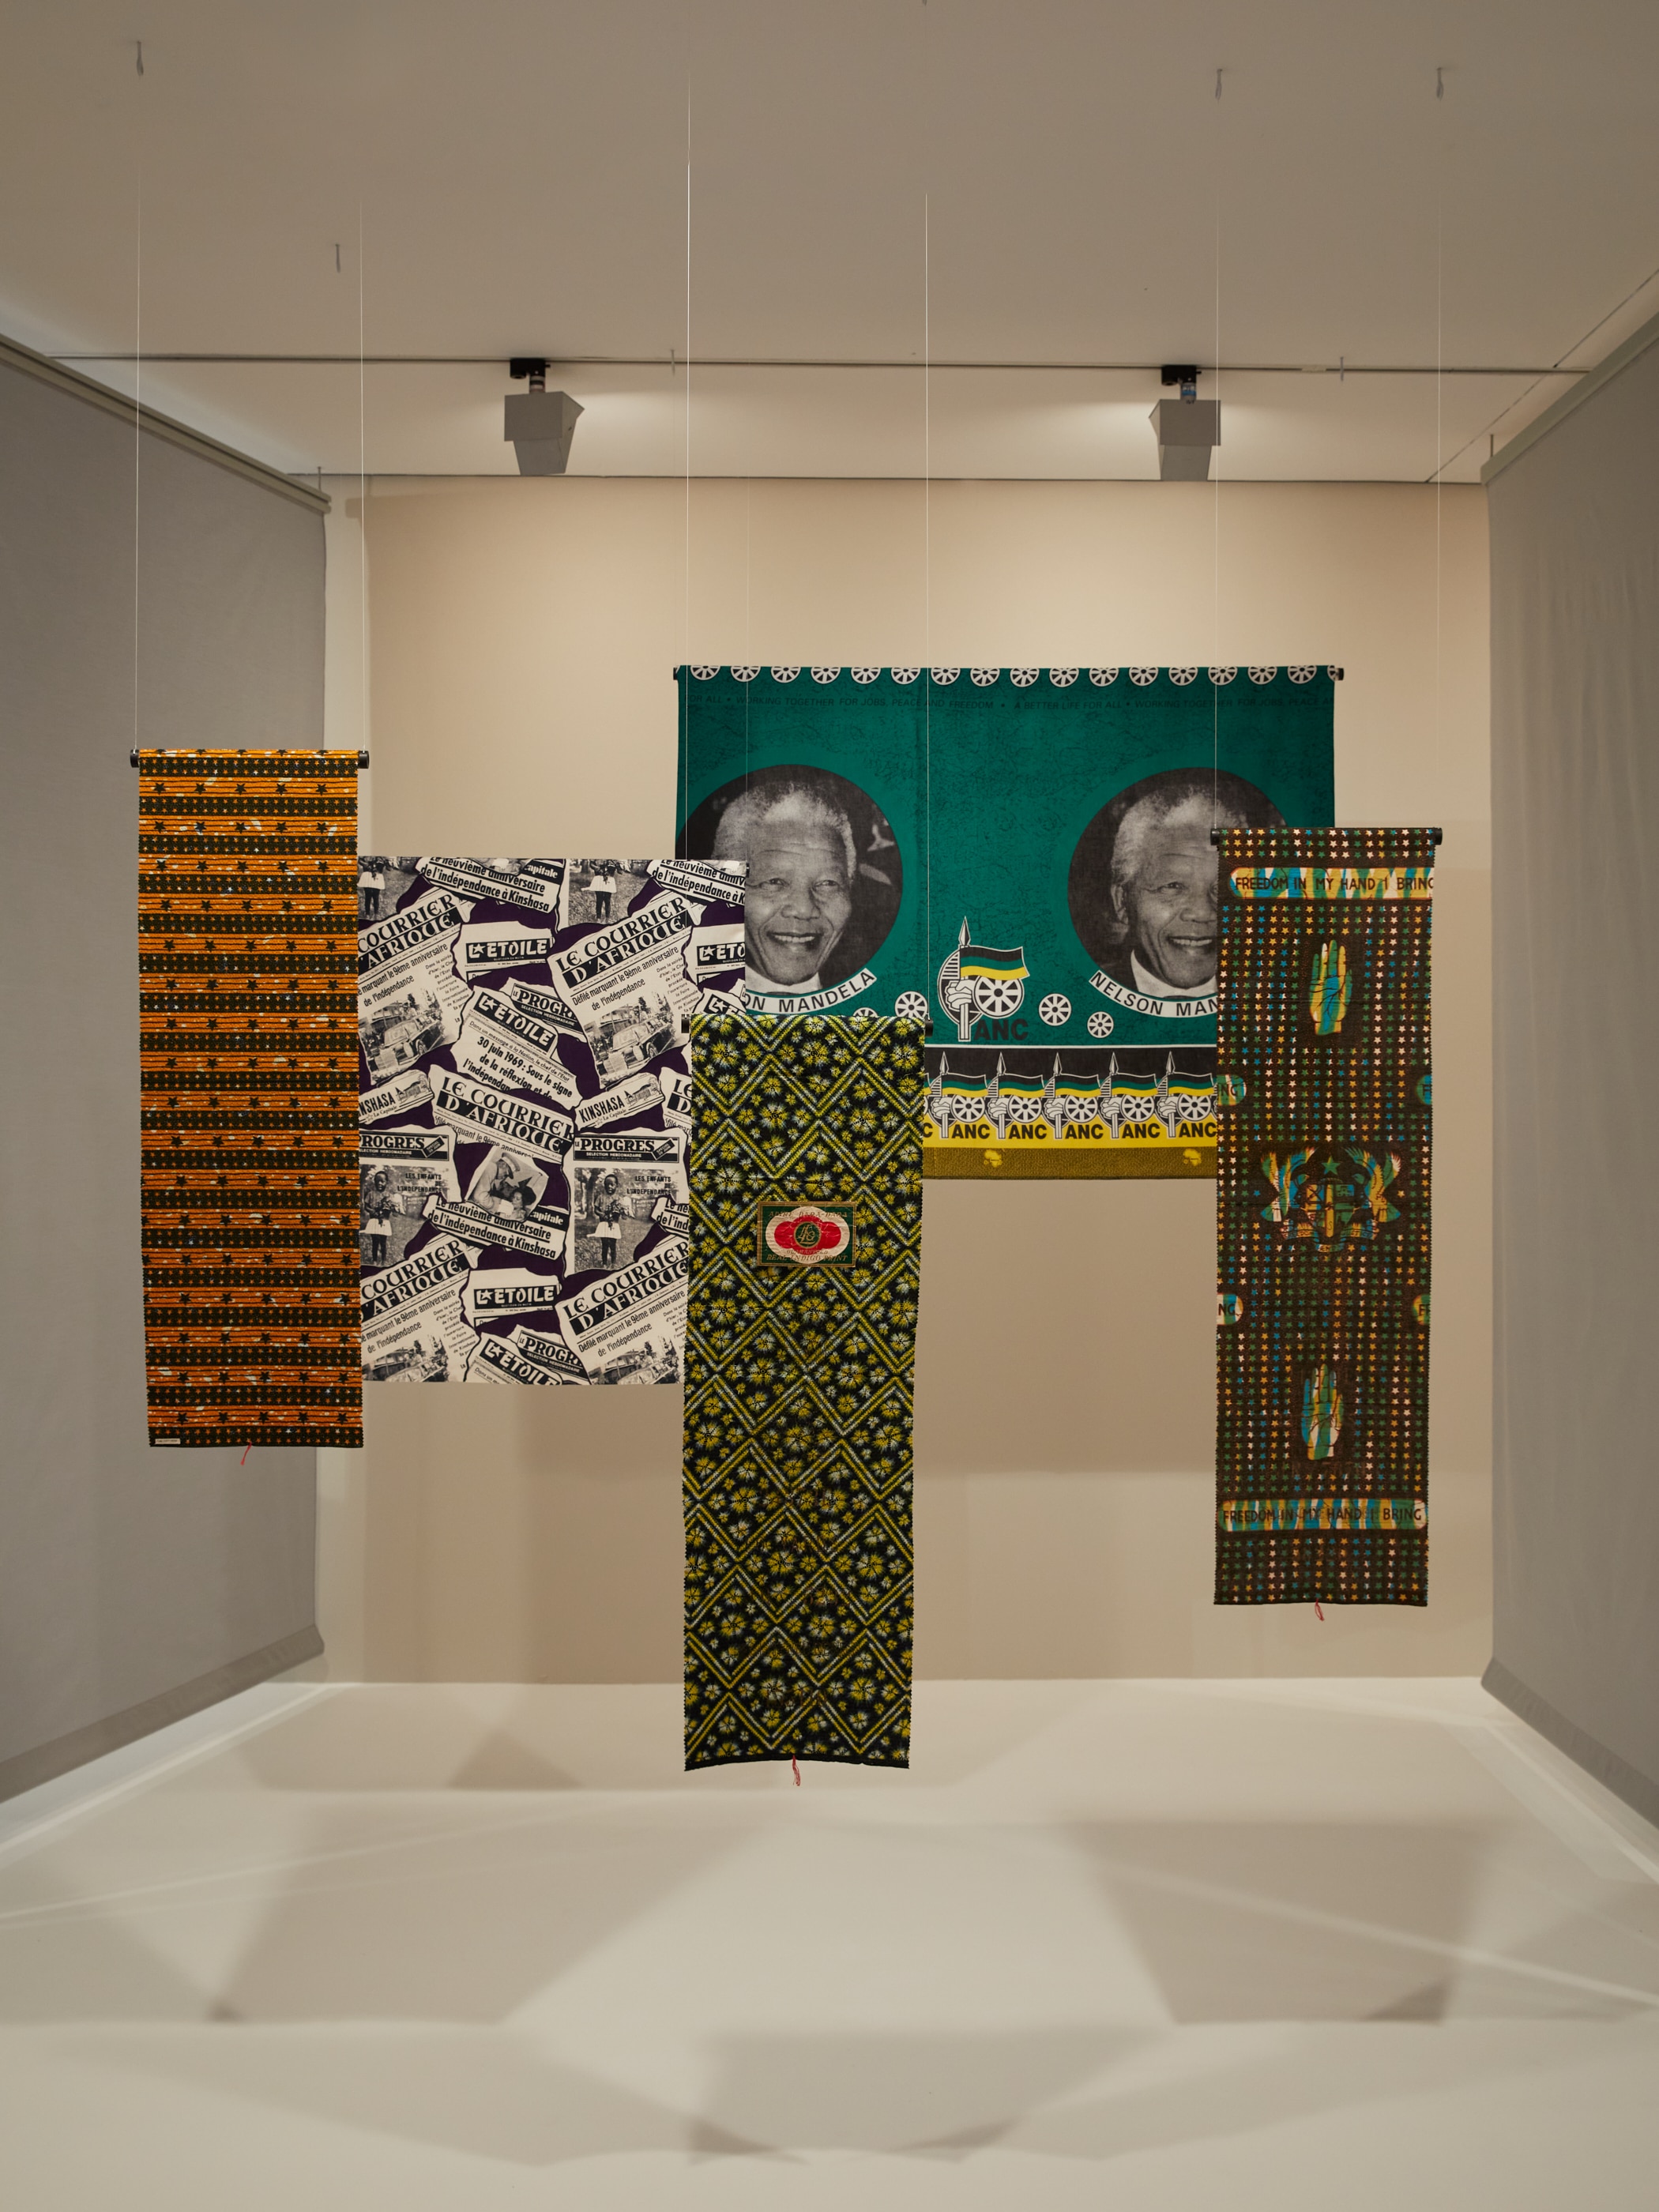 Five pieces of commemorate cloth hung up, one with Nelson Mandela's face twice against a green background.